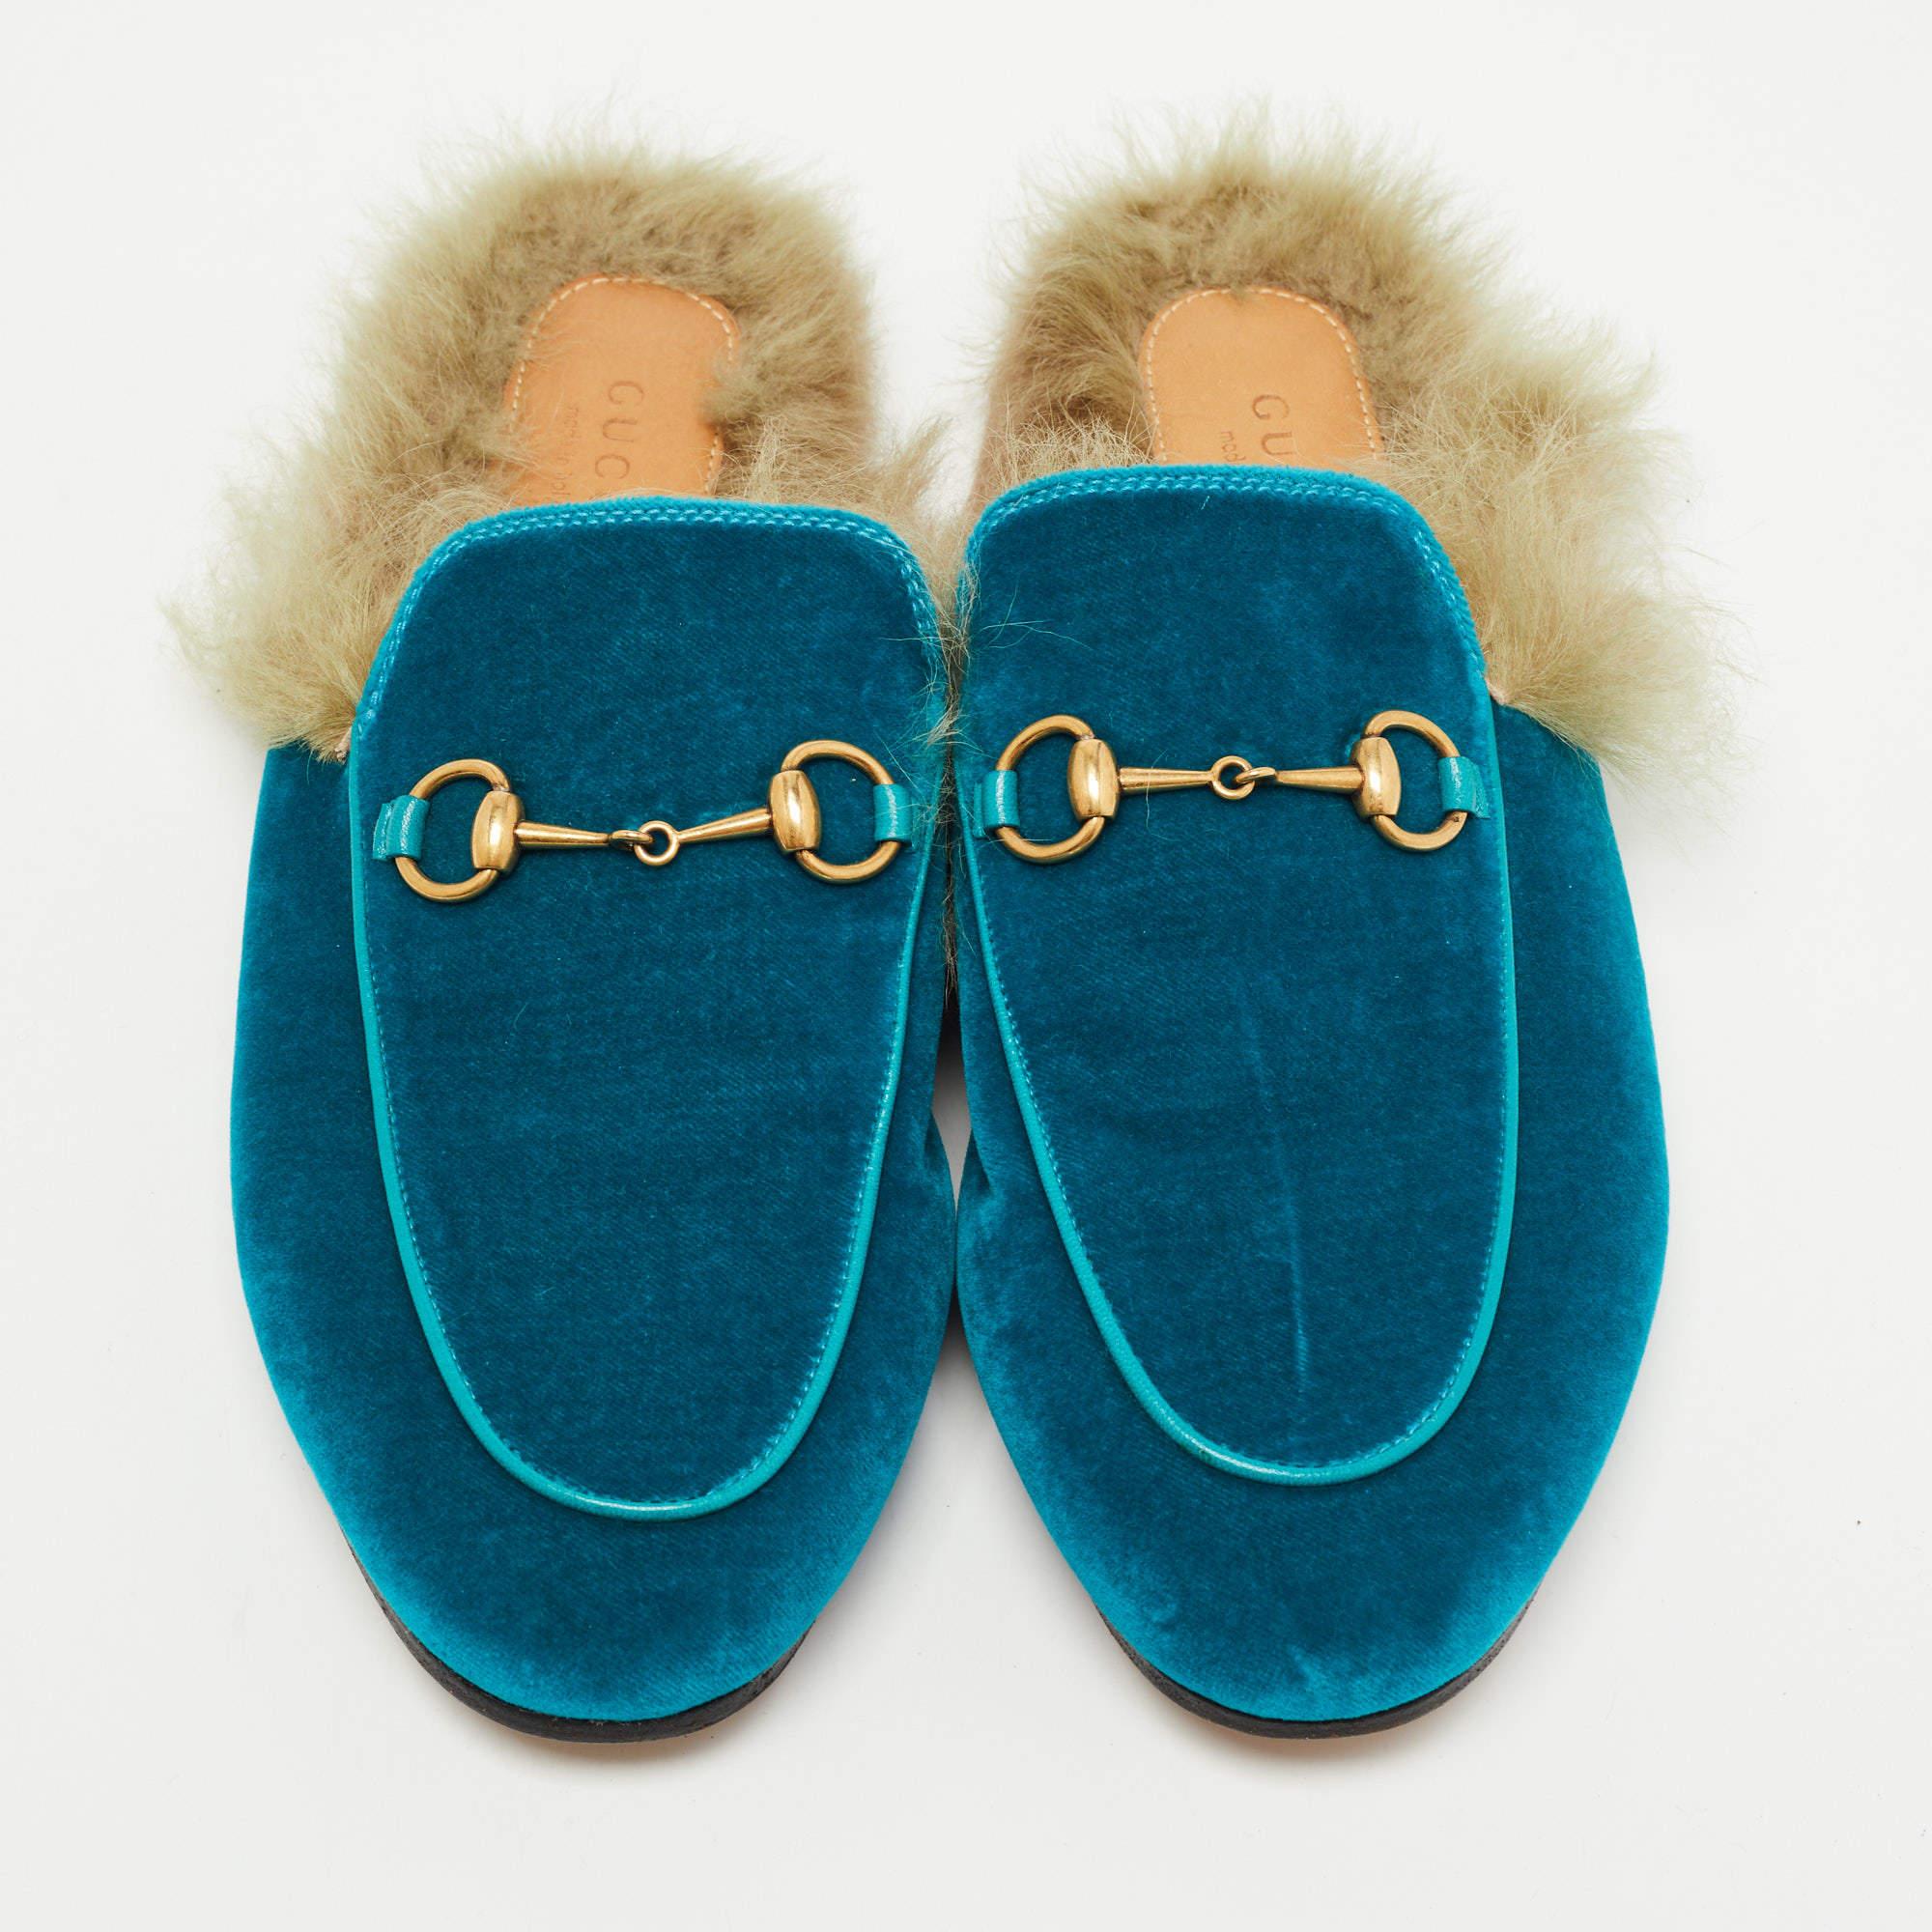 These Gucci Princetown mules signify luxury and practicality. An ultimate favorite of style enthusiasts, its silhouette gets a luxe update with the Horsebit motif on the uppers. It comes made from velvet along with fur and features a slip-on